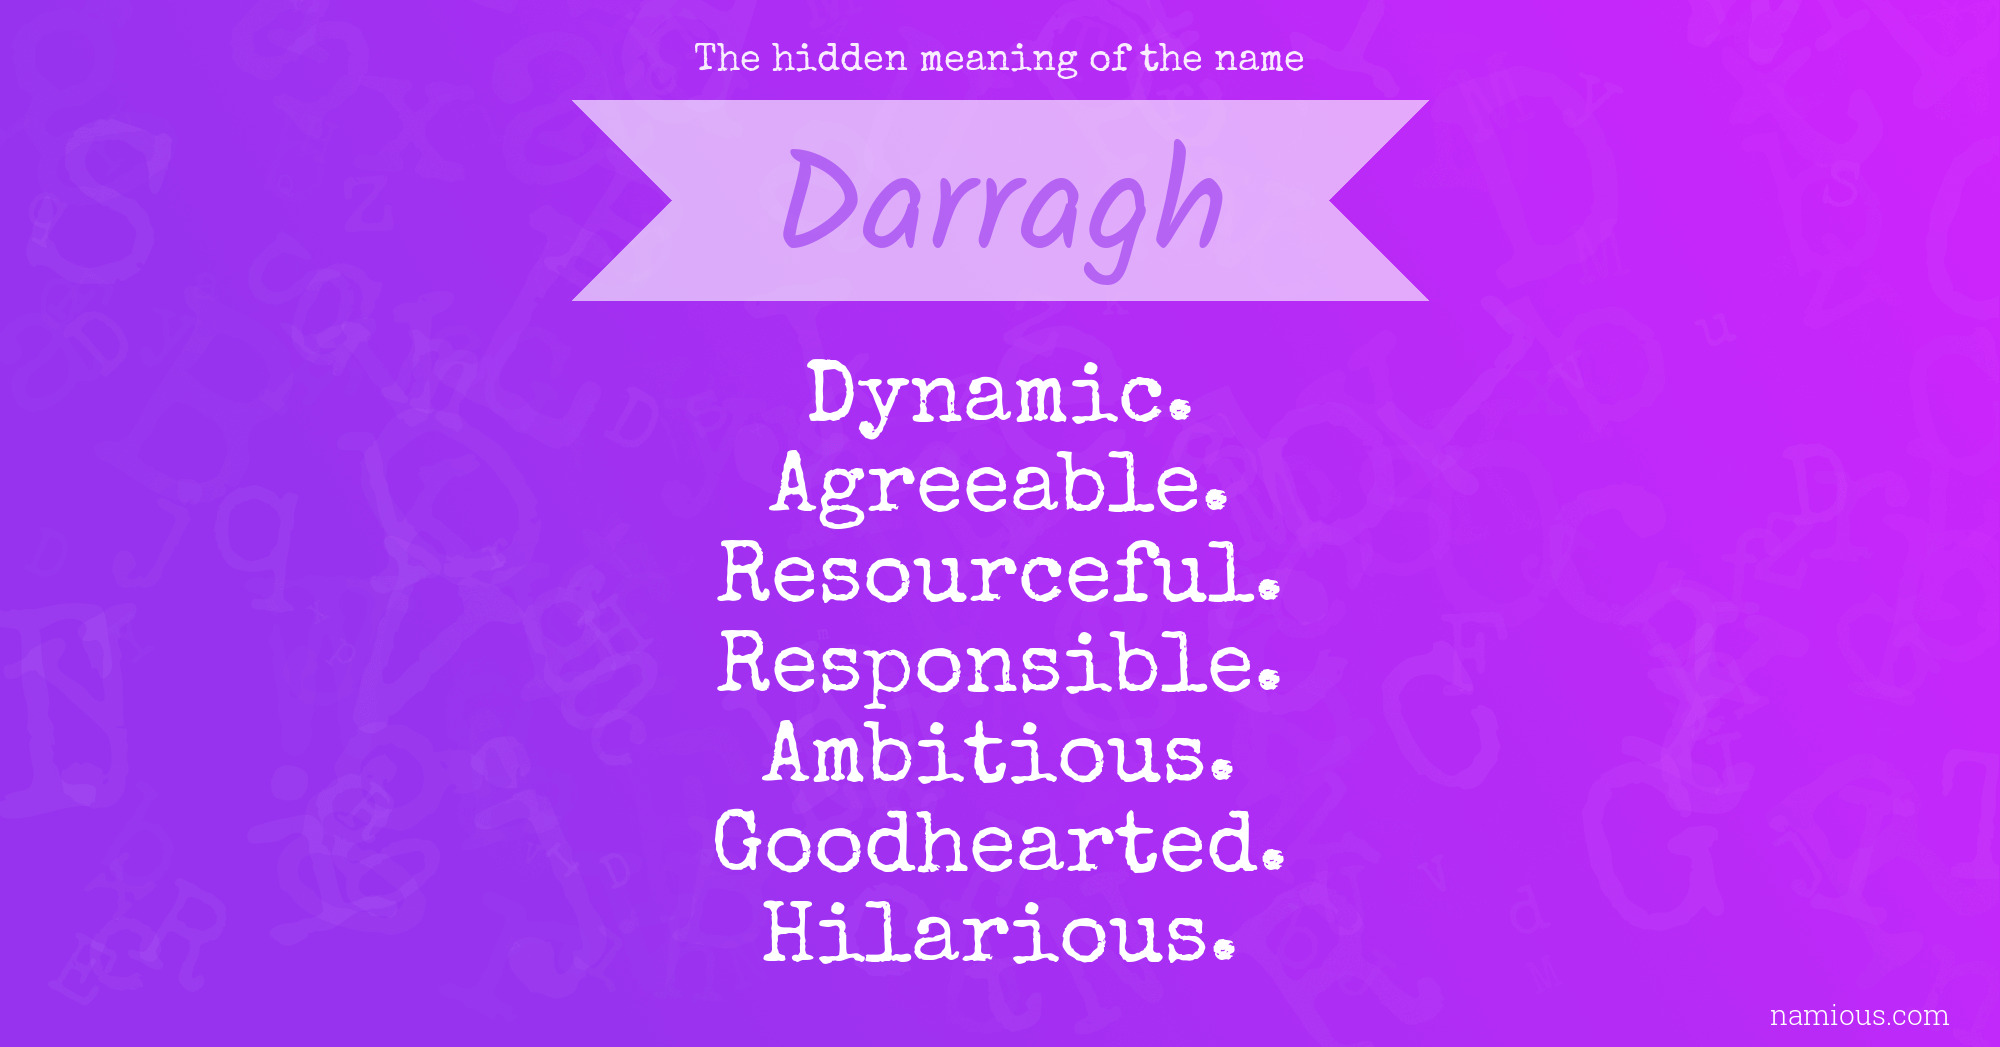 The hidden meaning of the name Darragh